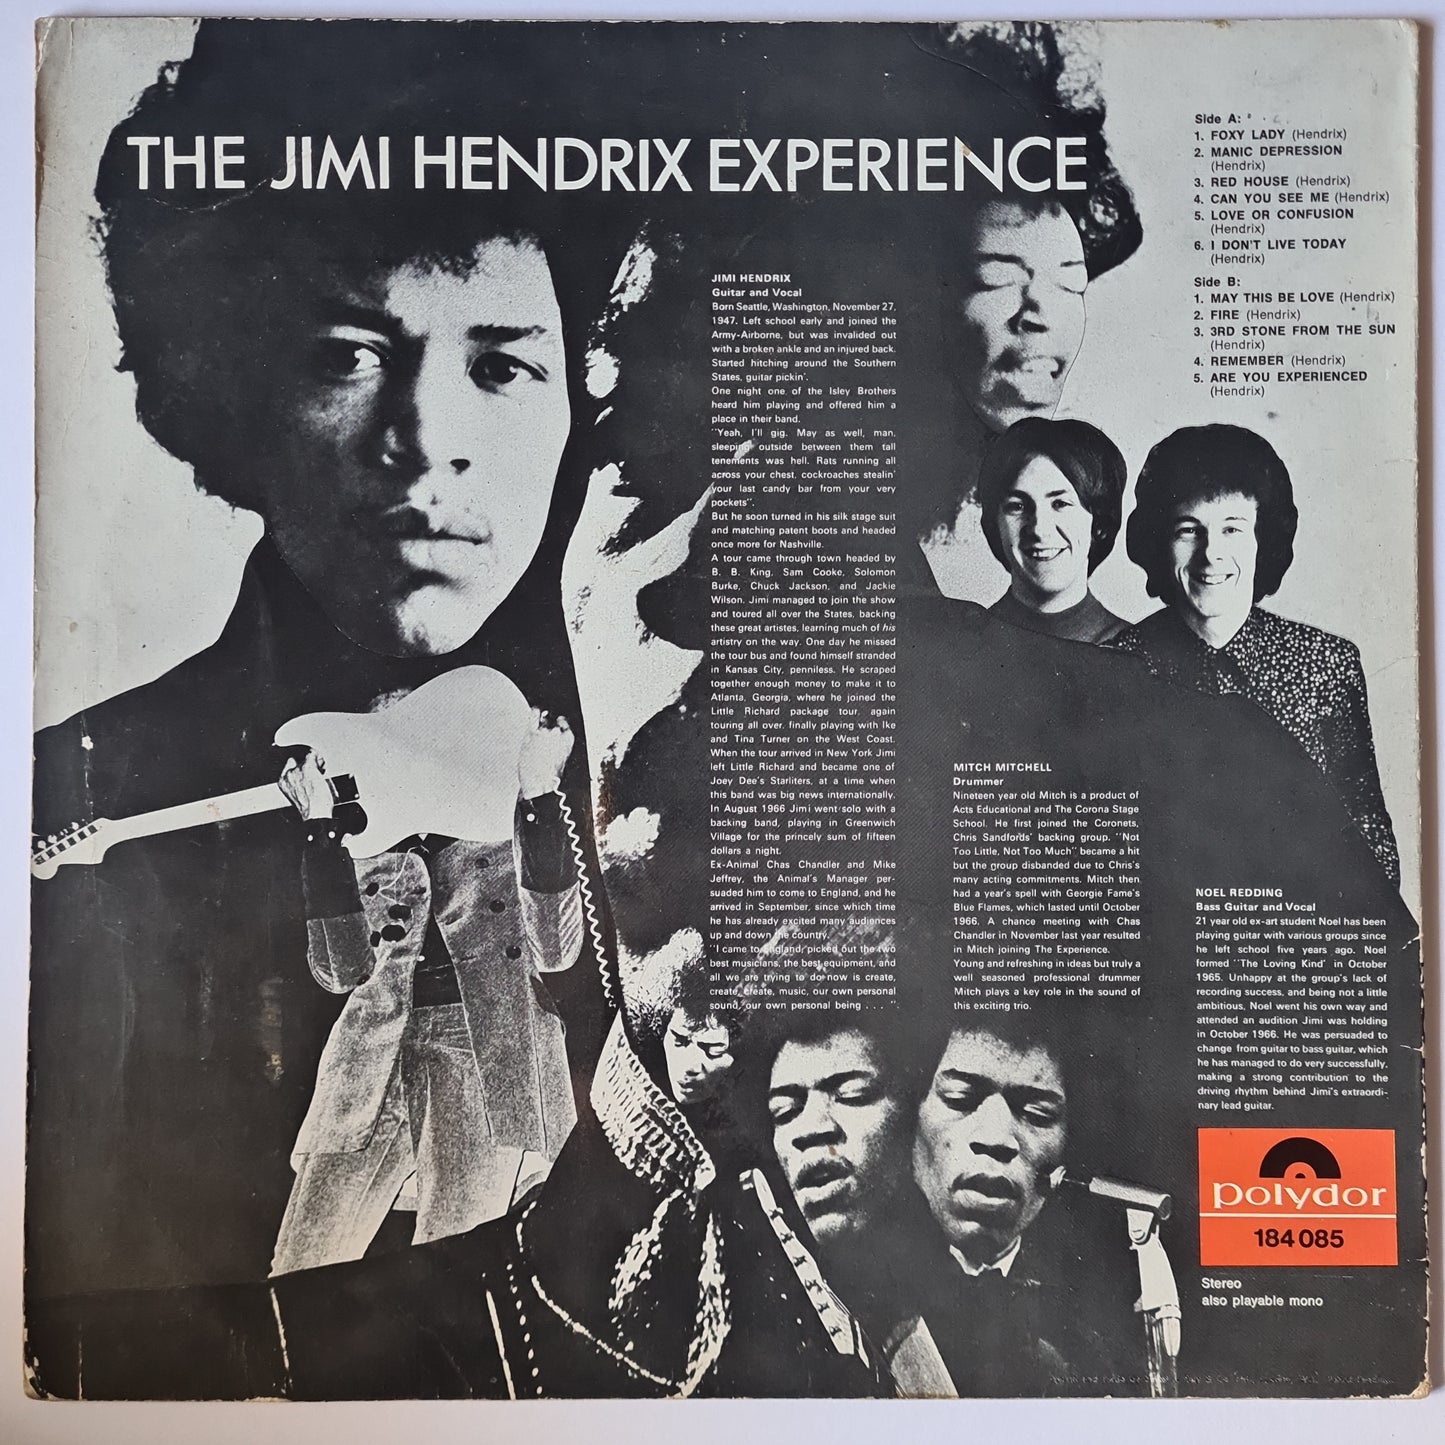 The Jimi Hendrix Experience – Are You Experienced? - 1967 (German Pressing)